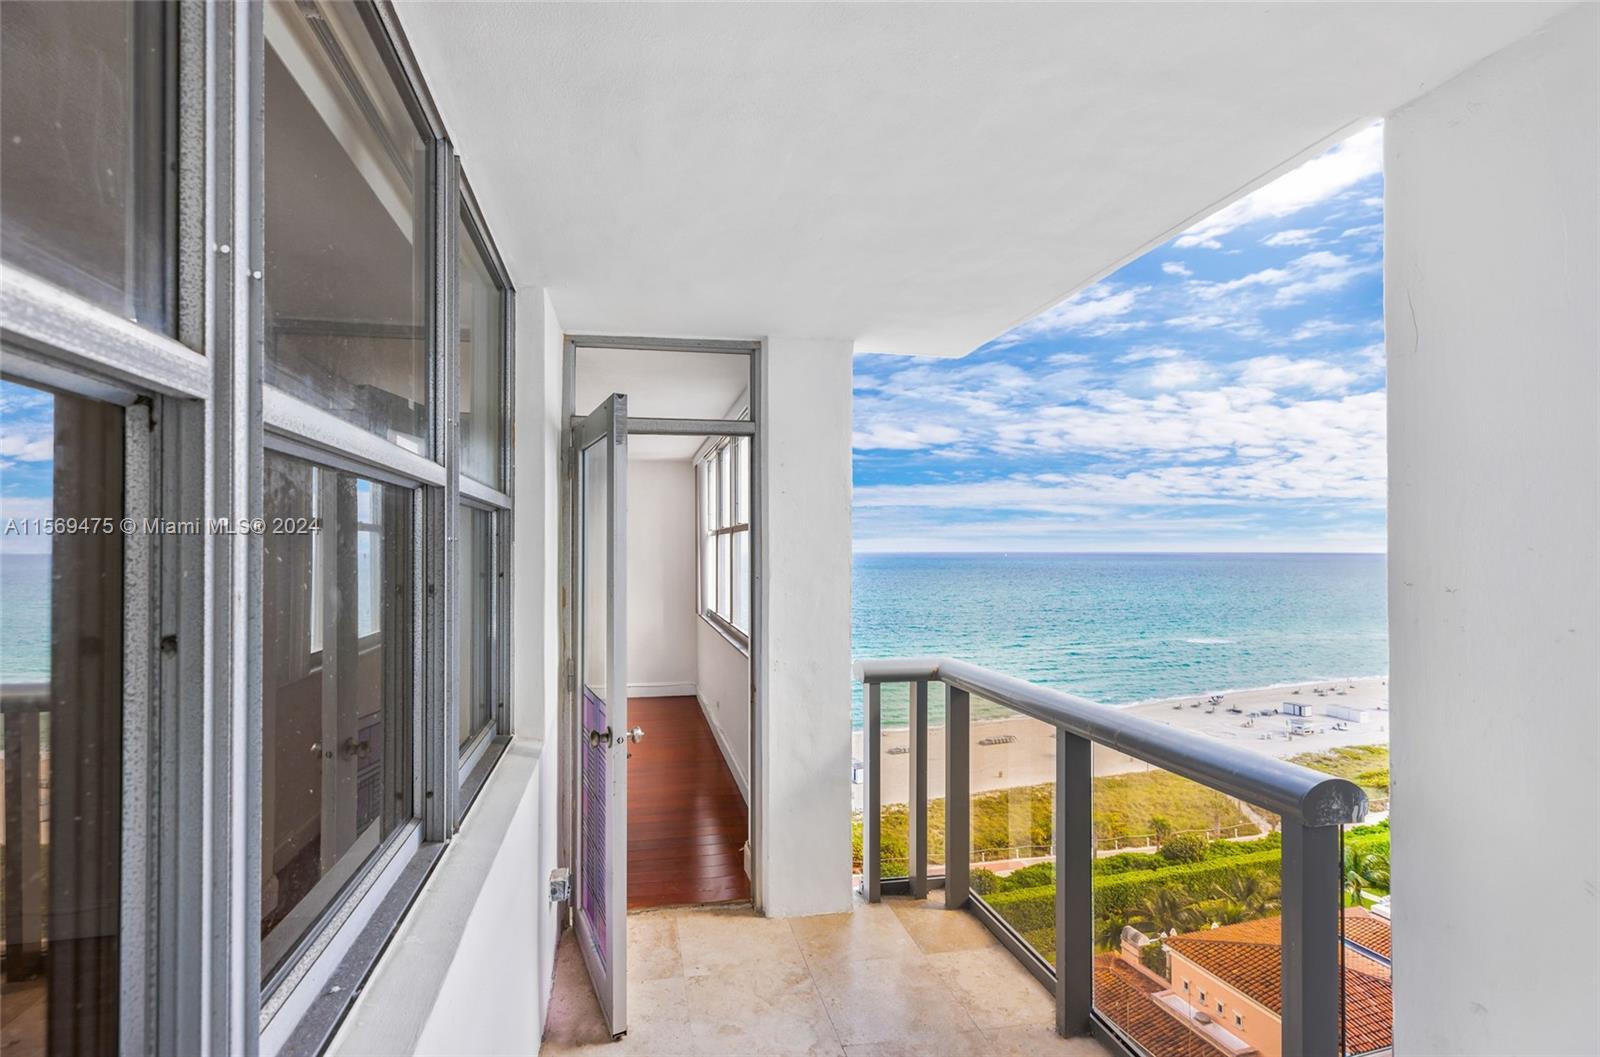 AMAZING OCEAN VIEW FROM THIS BEAUTIFUL 1 BED 2 BATH CONDO! Bright and spacious with floor-to-ceiling